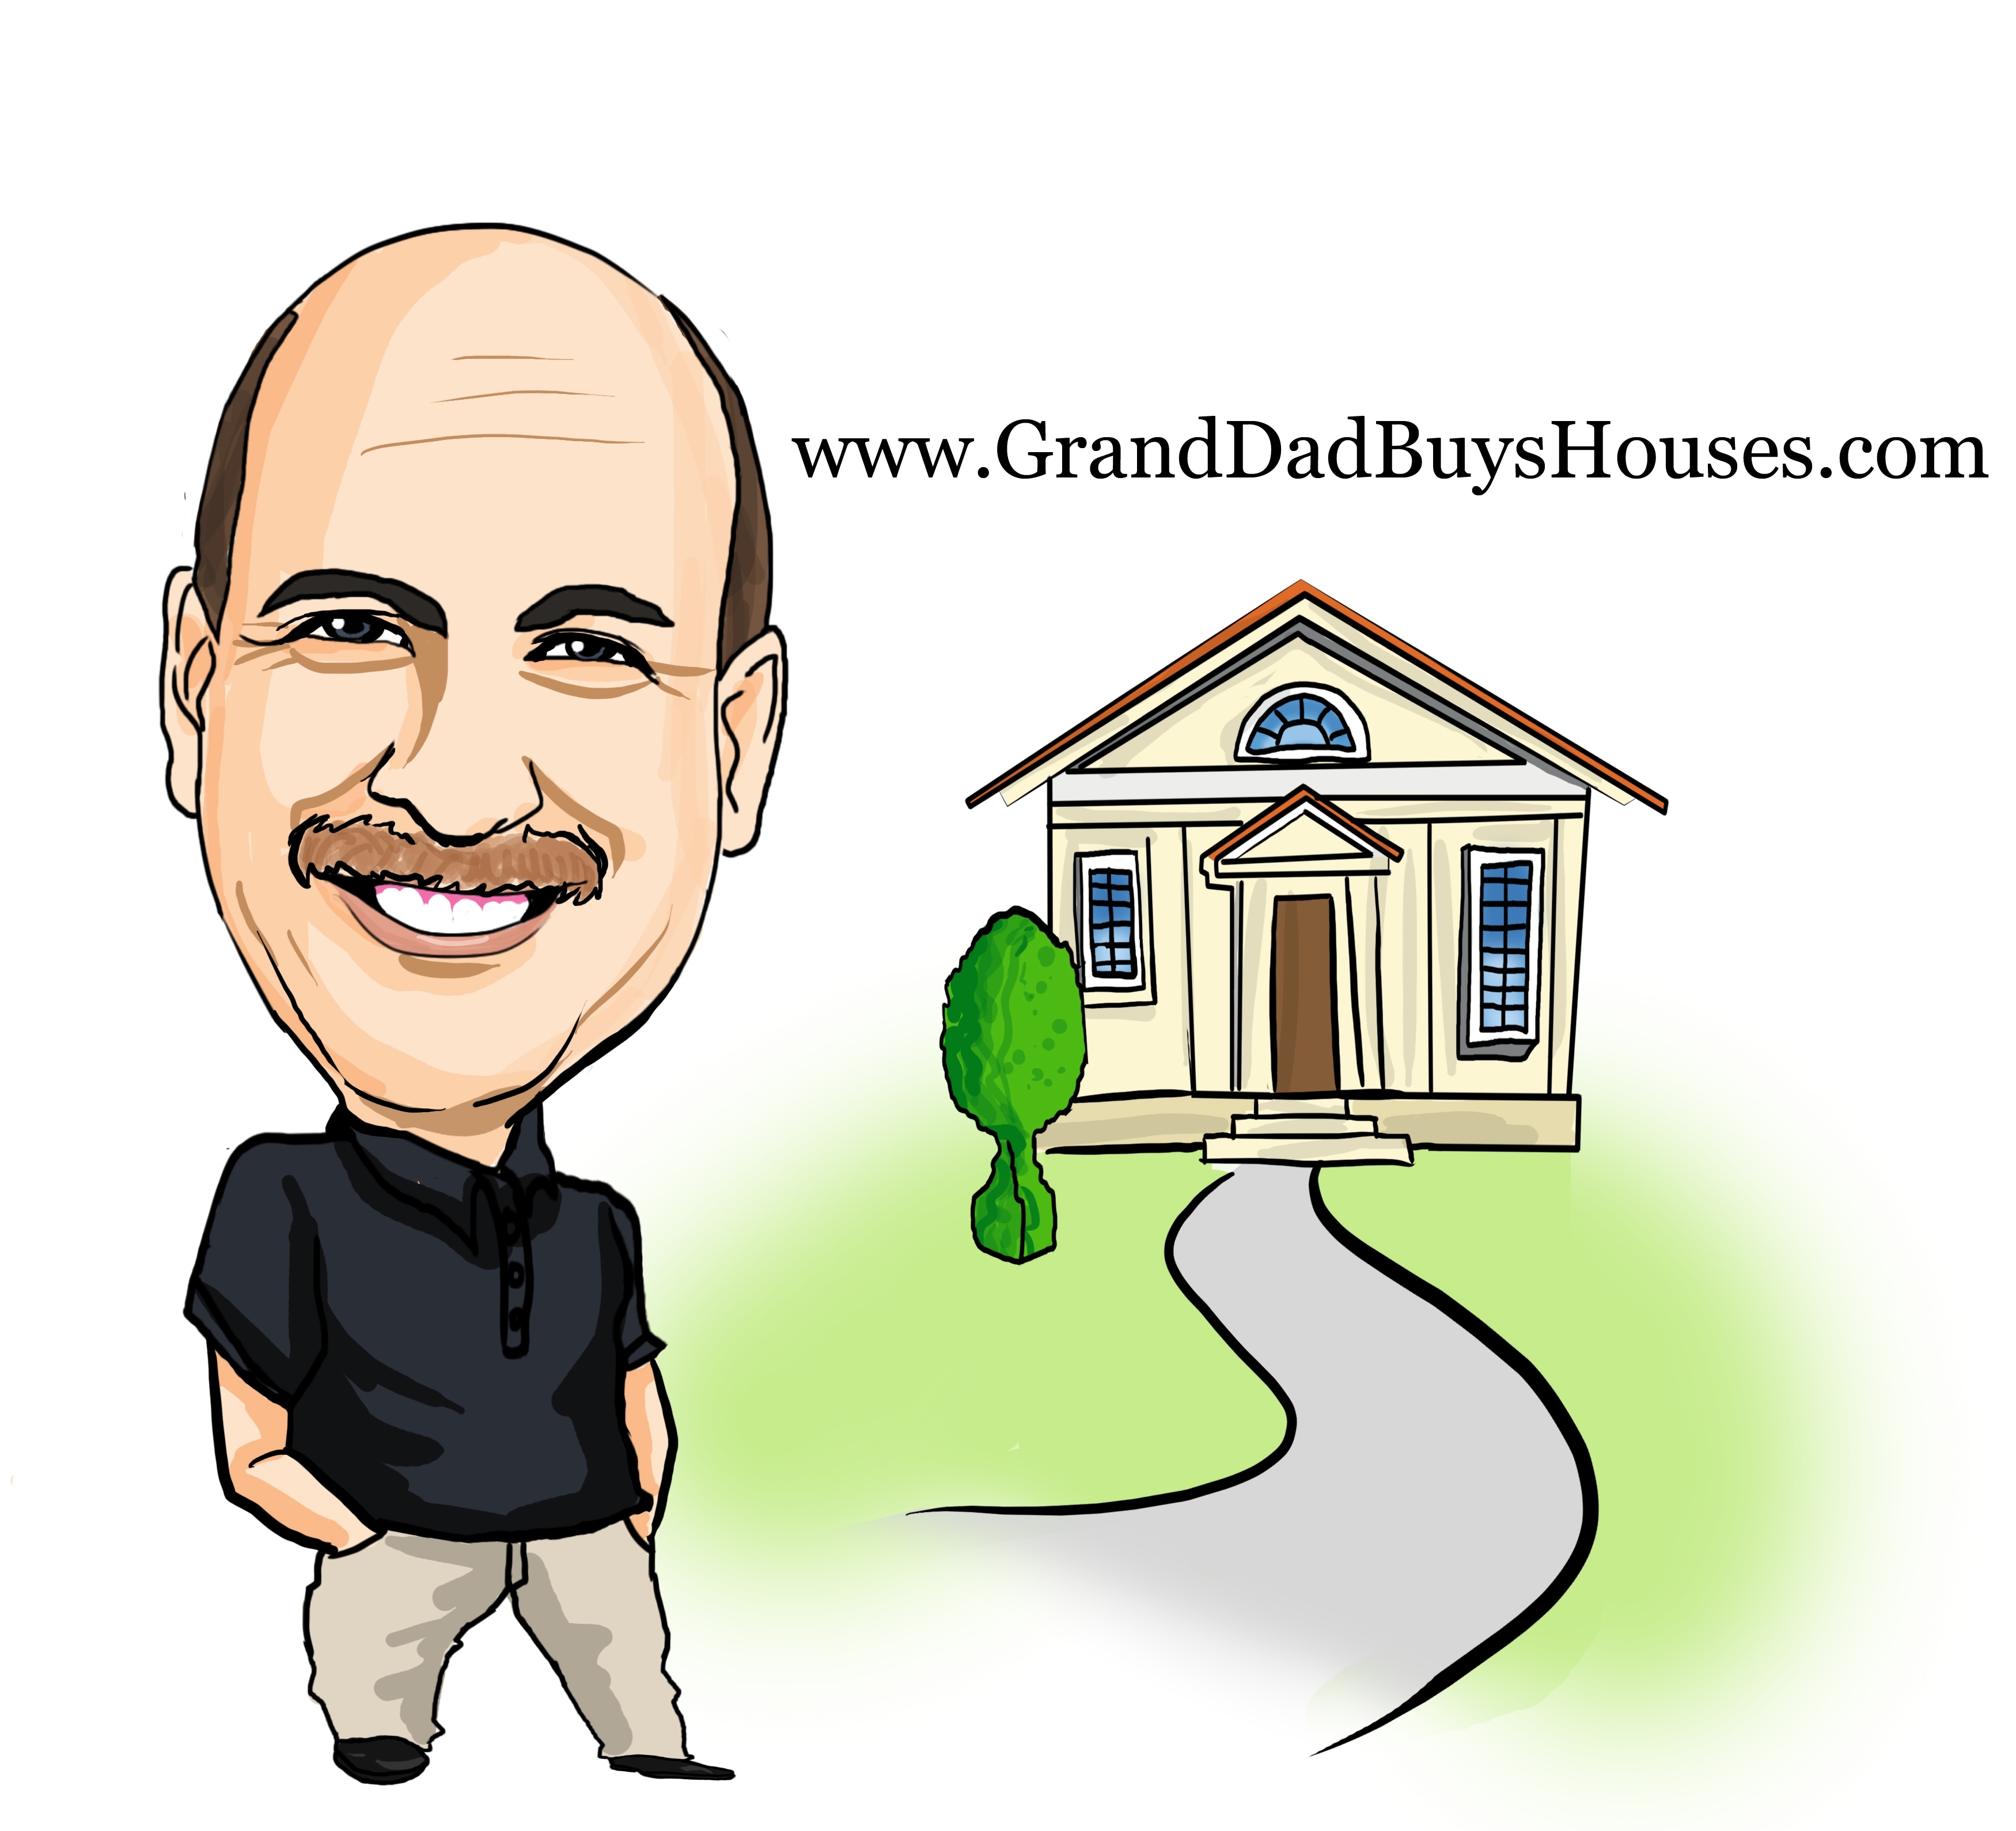 Grand Dad Buys Houses fast for Cash